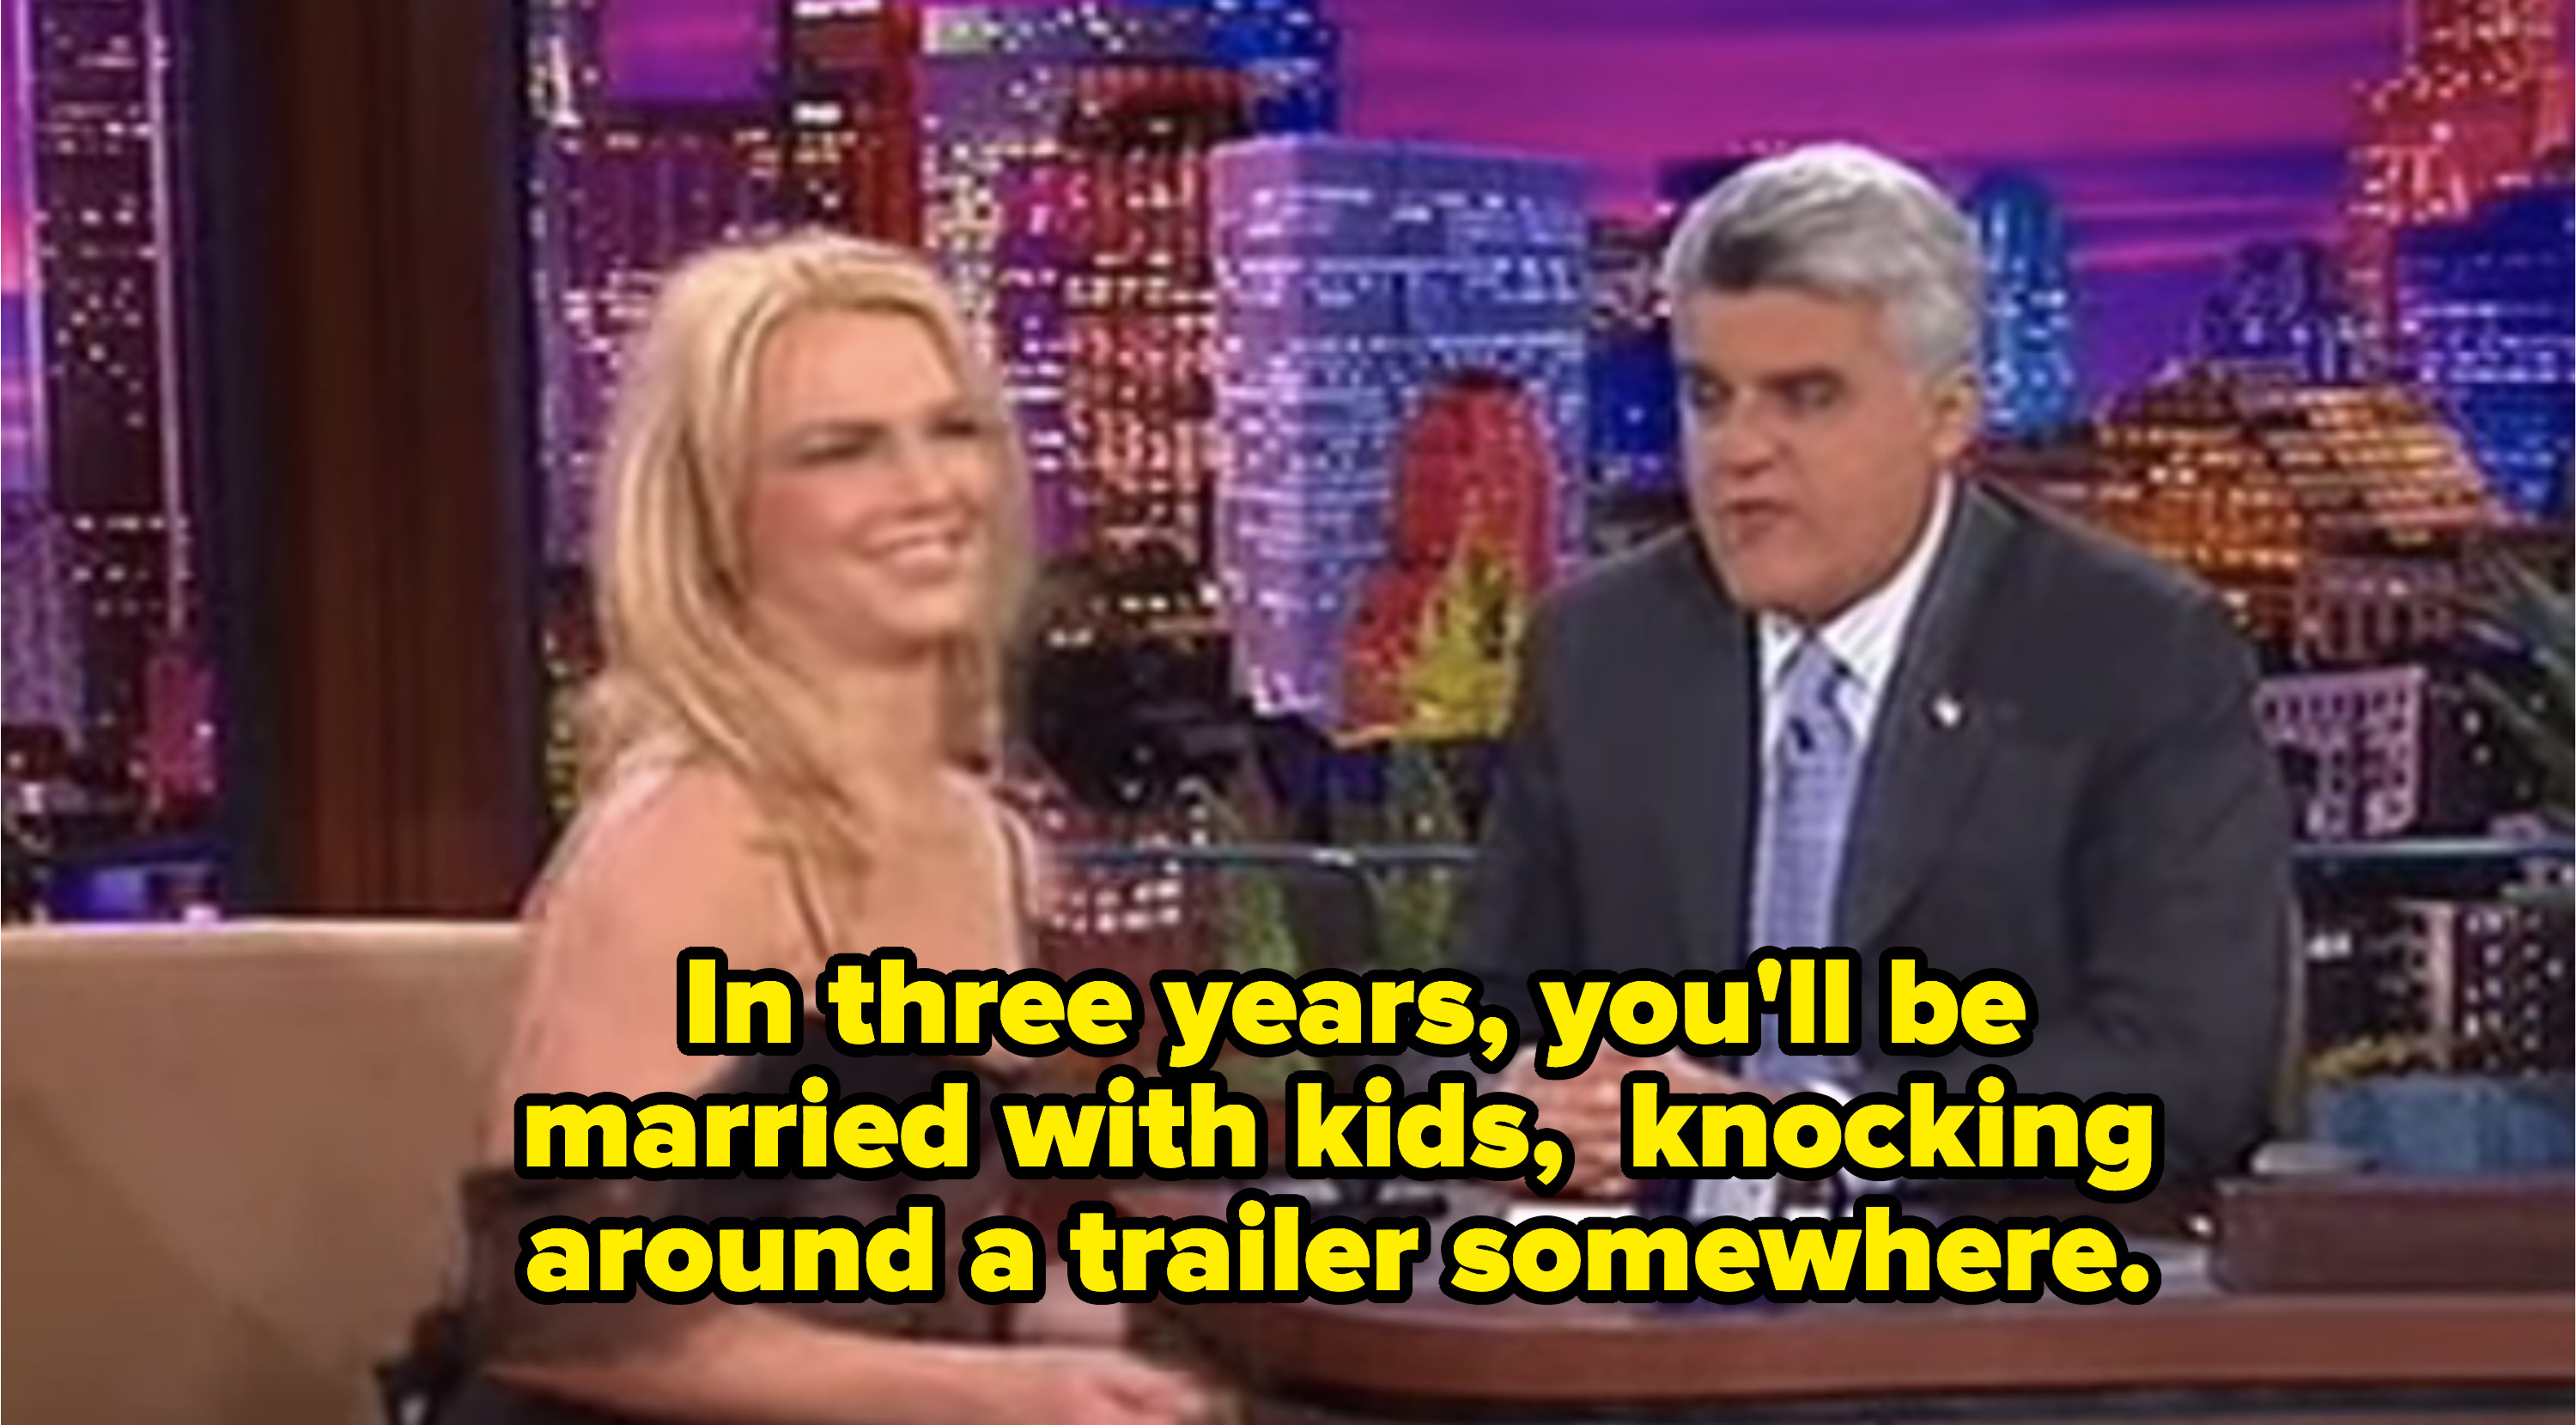 Jay said &quot;In three years, you&#x27;ll be married with kids, knocking around a trailer somewhere&quot;